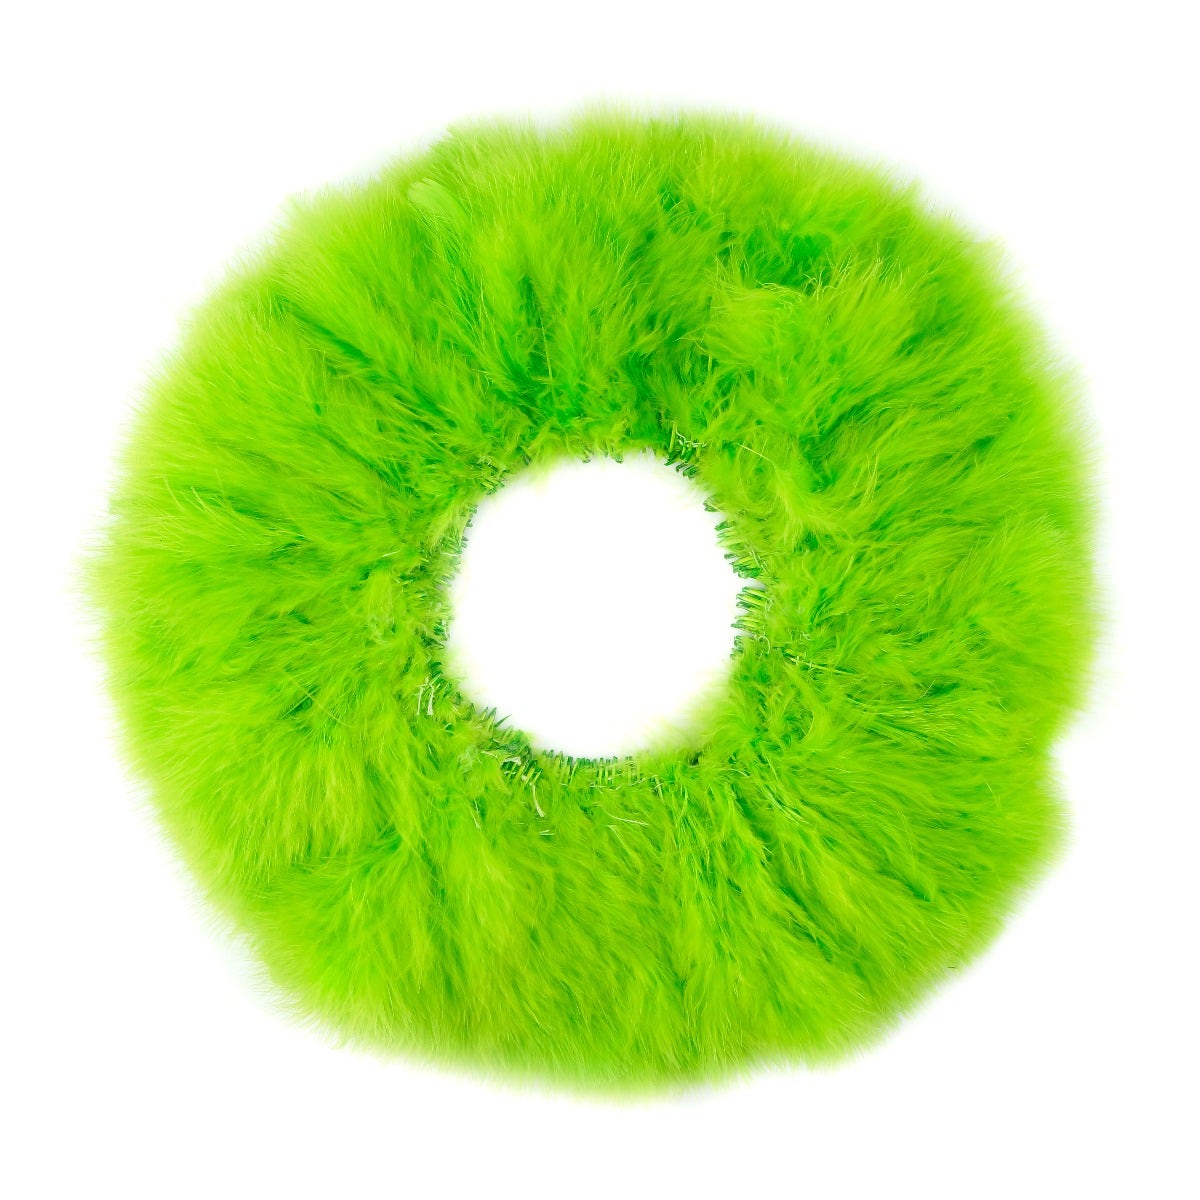 TURKEY MARABOU GOOD QUILL FEATHERS  3-4" - LIME